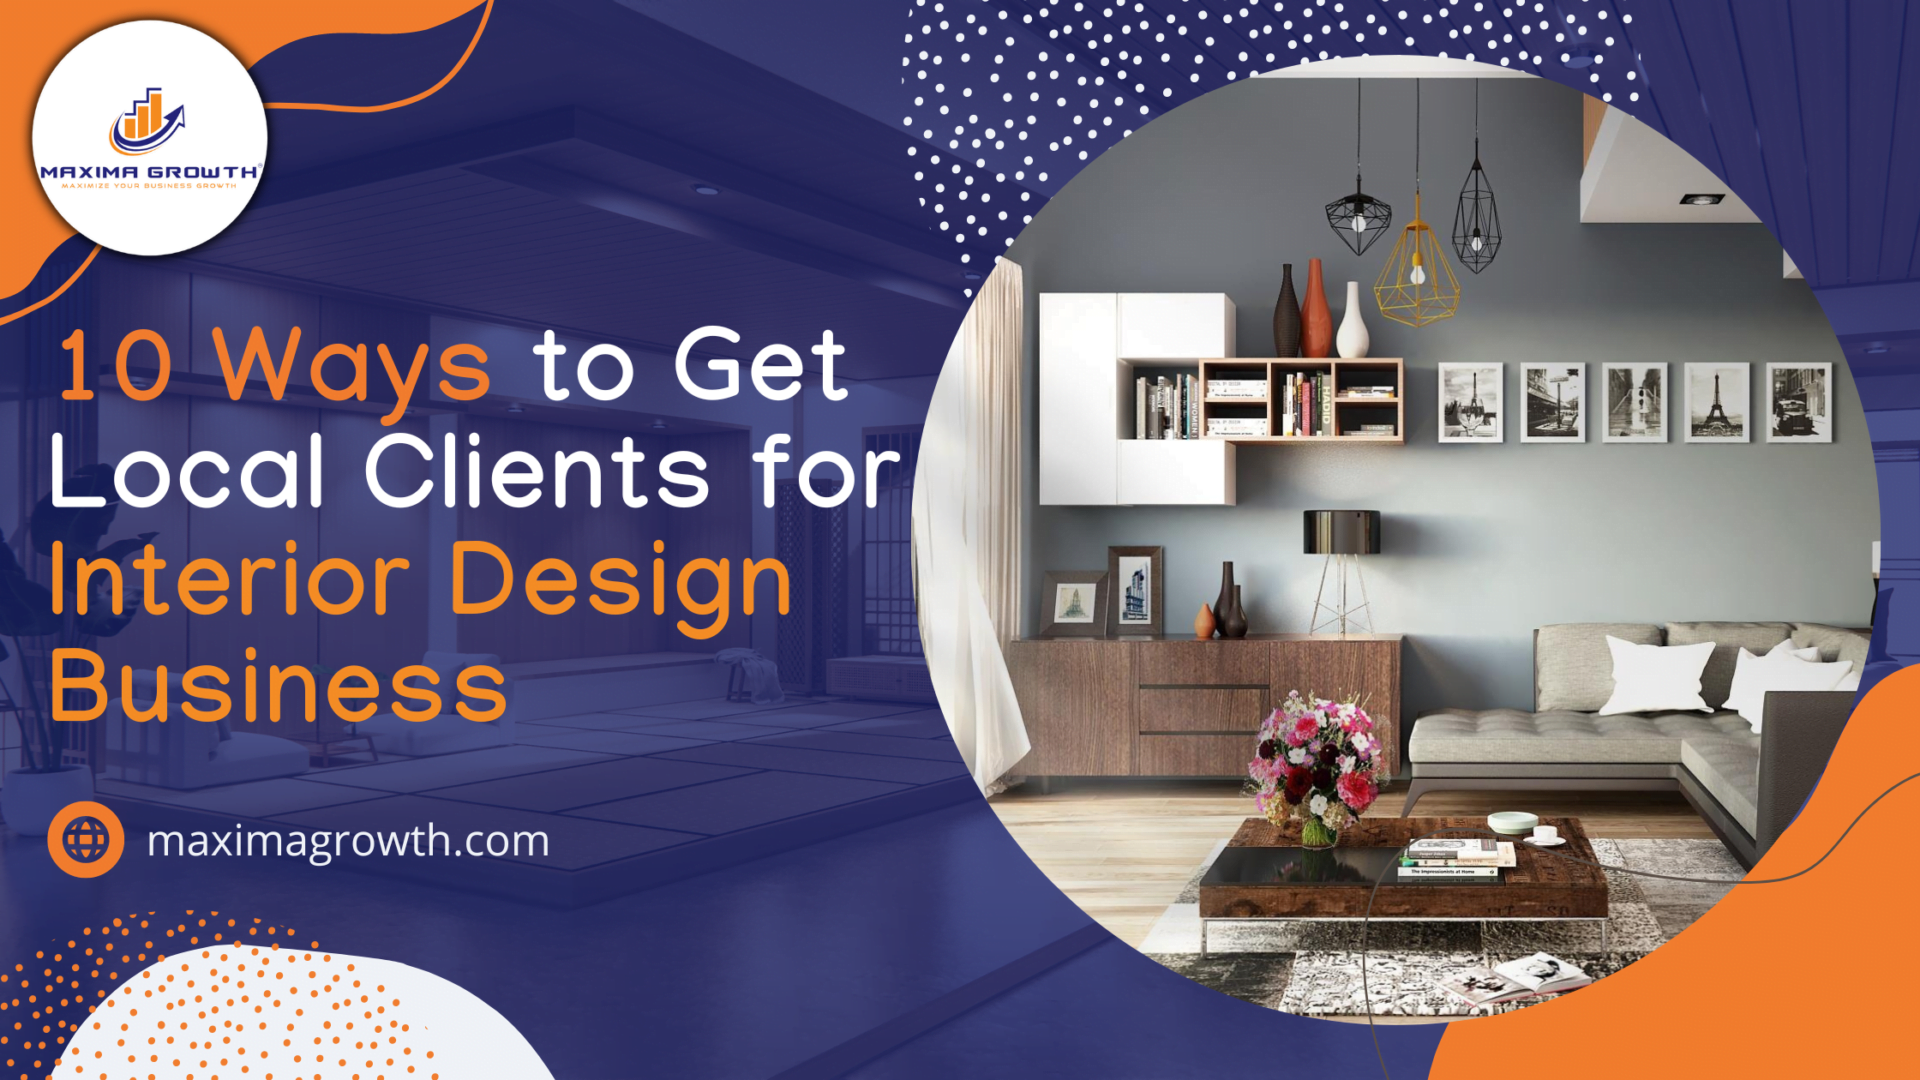 10 Ways to Get Local Clients for Interior Design Business